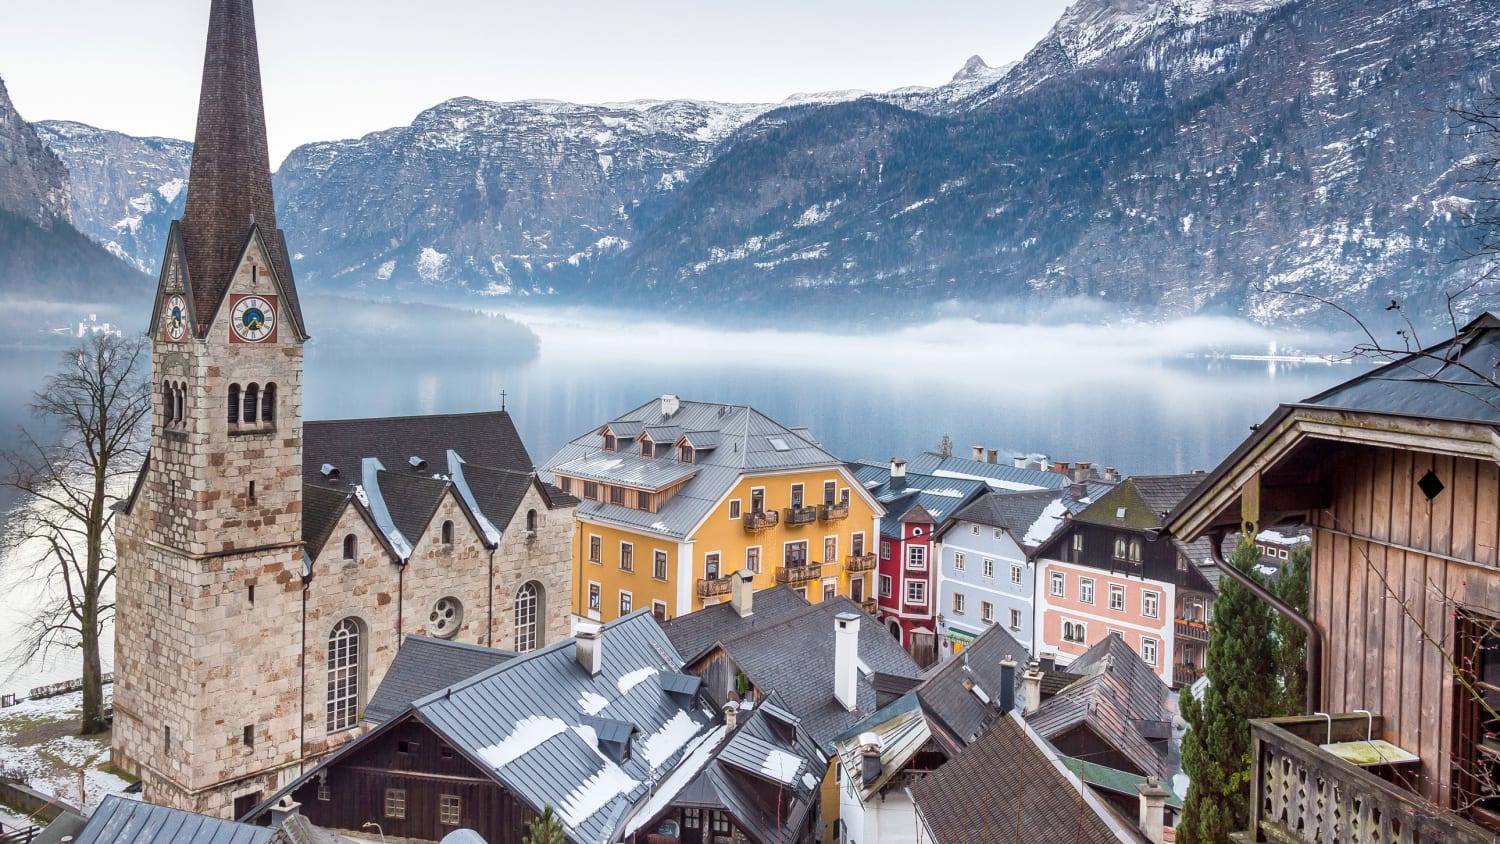 12 Photos That Will Make You Want to Visit Austria